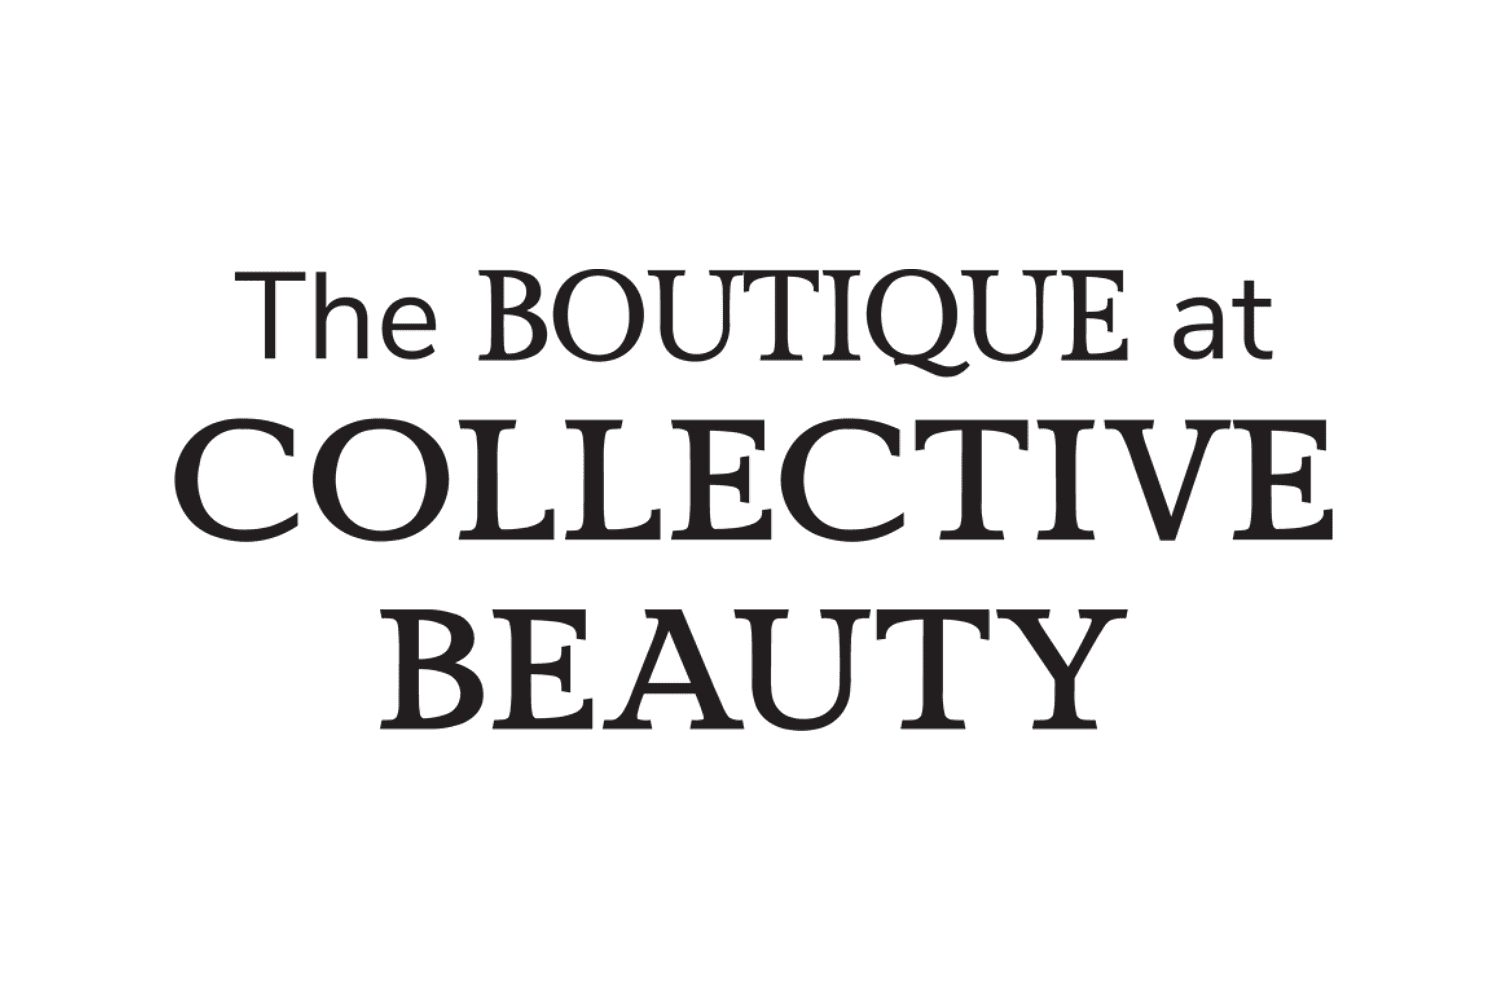 Logo text "The BOUTIQUE at COLLECTIVE BEAUTY" on a green background.